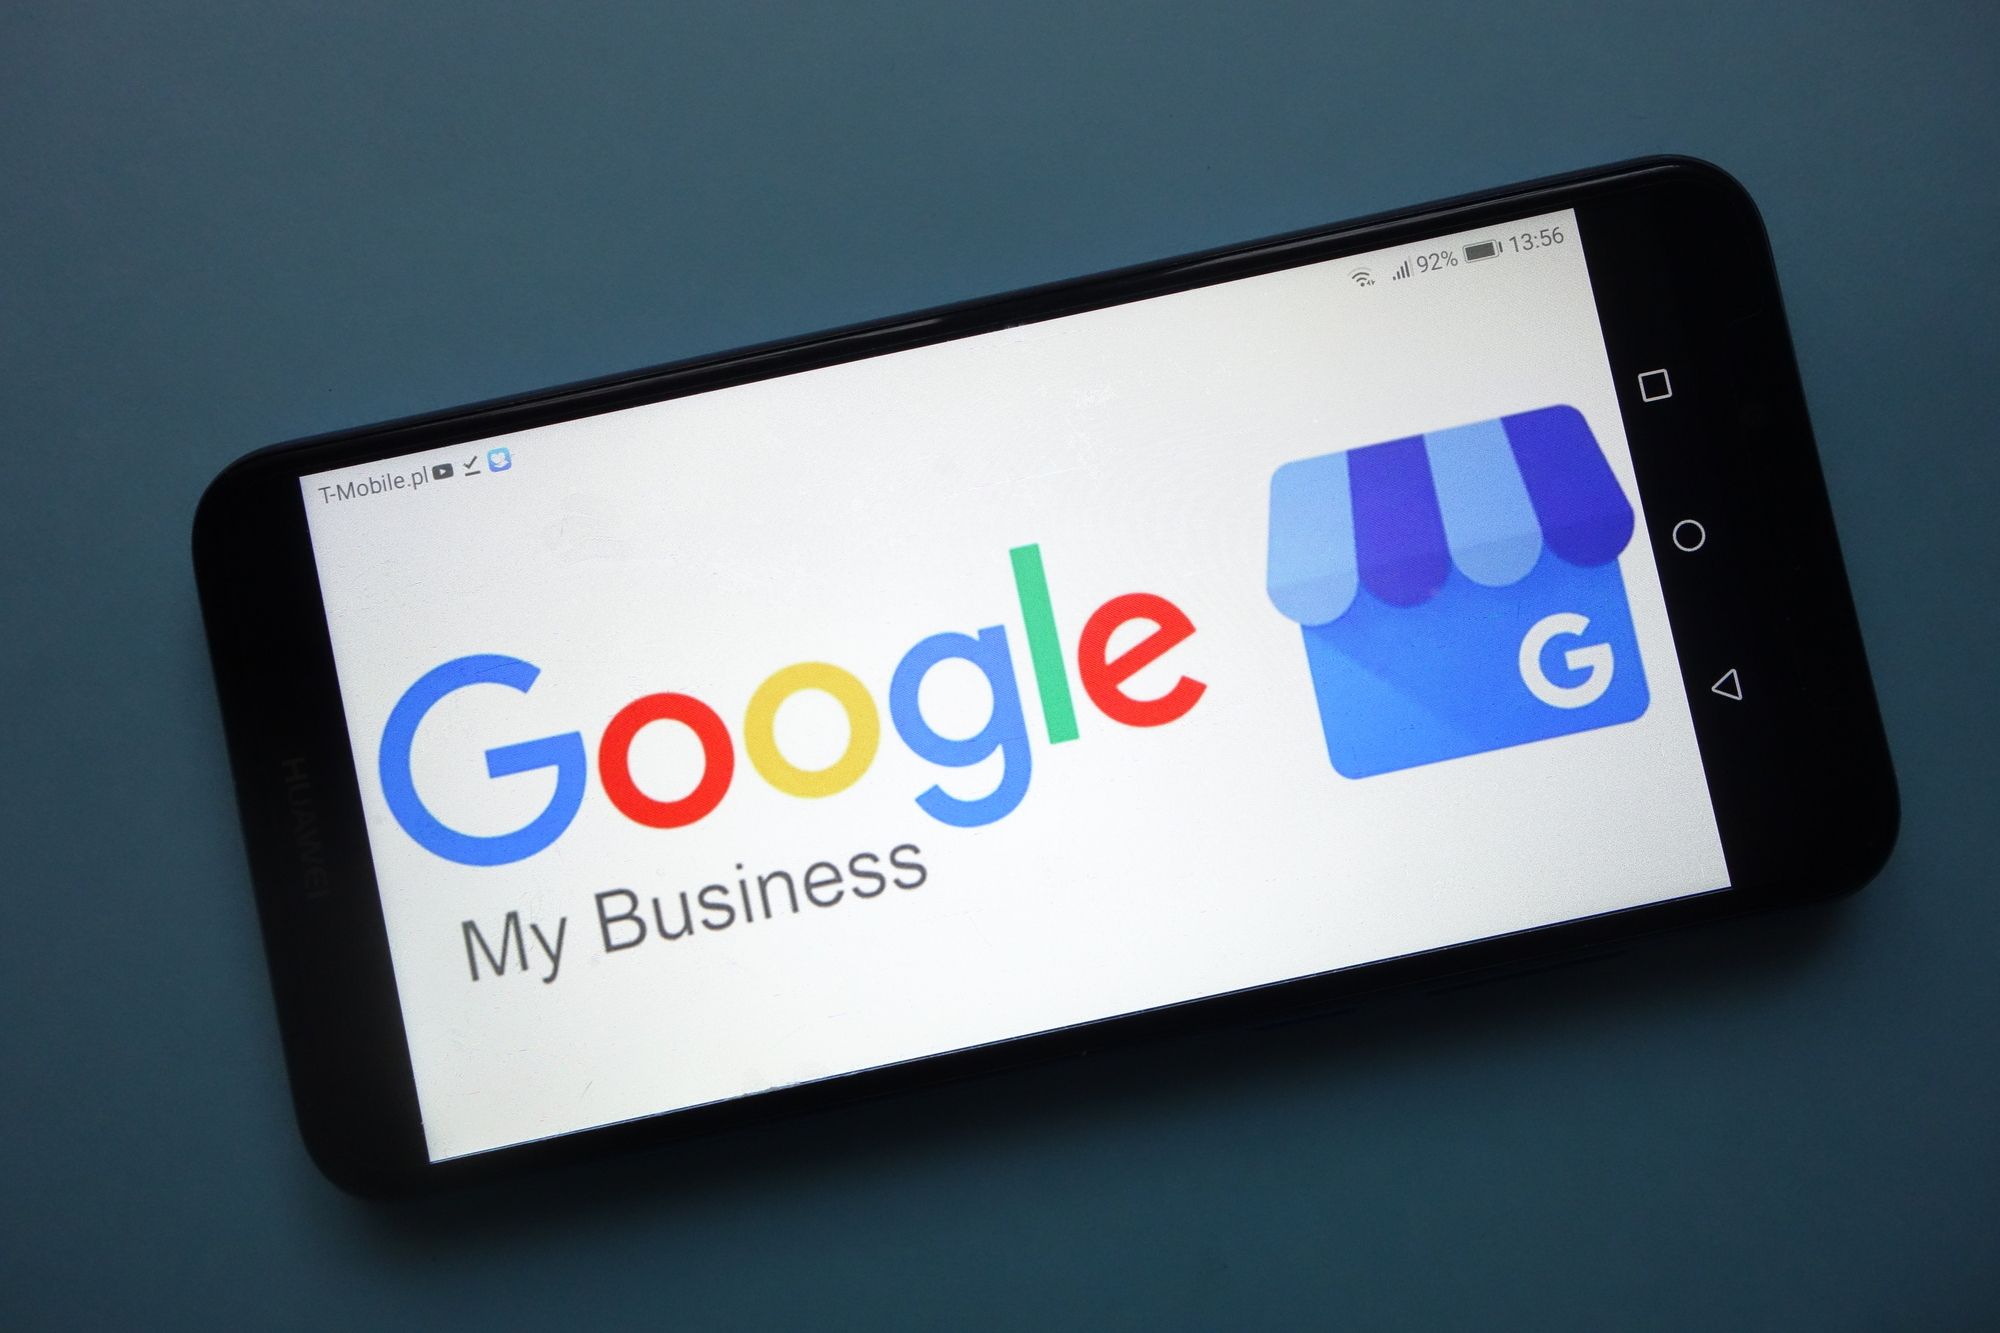 How to pause your business online in Google Search